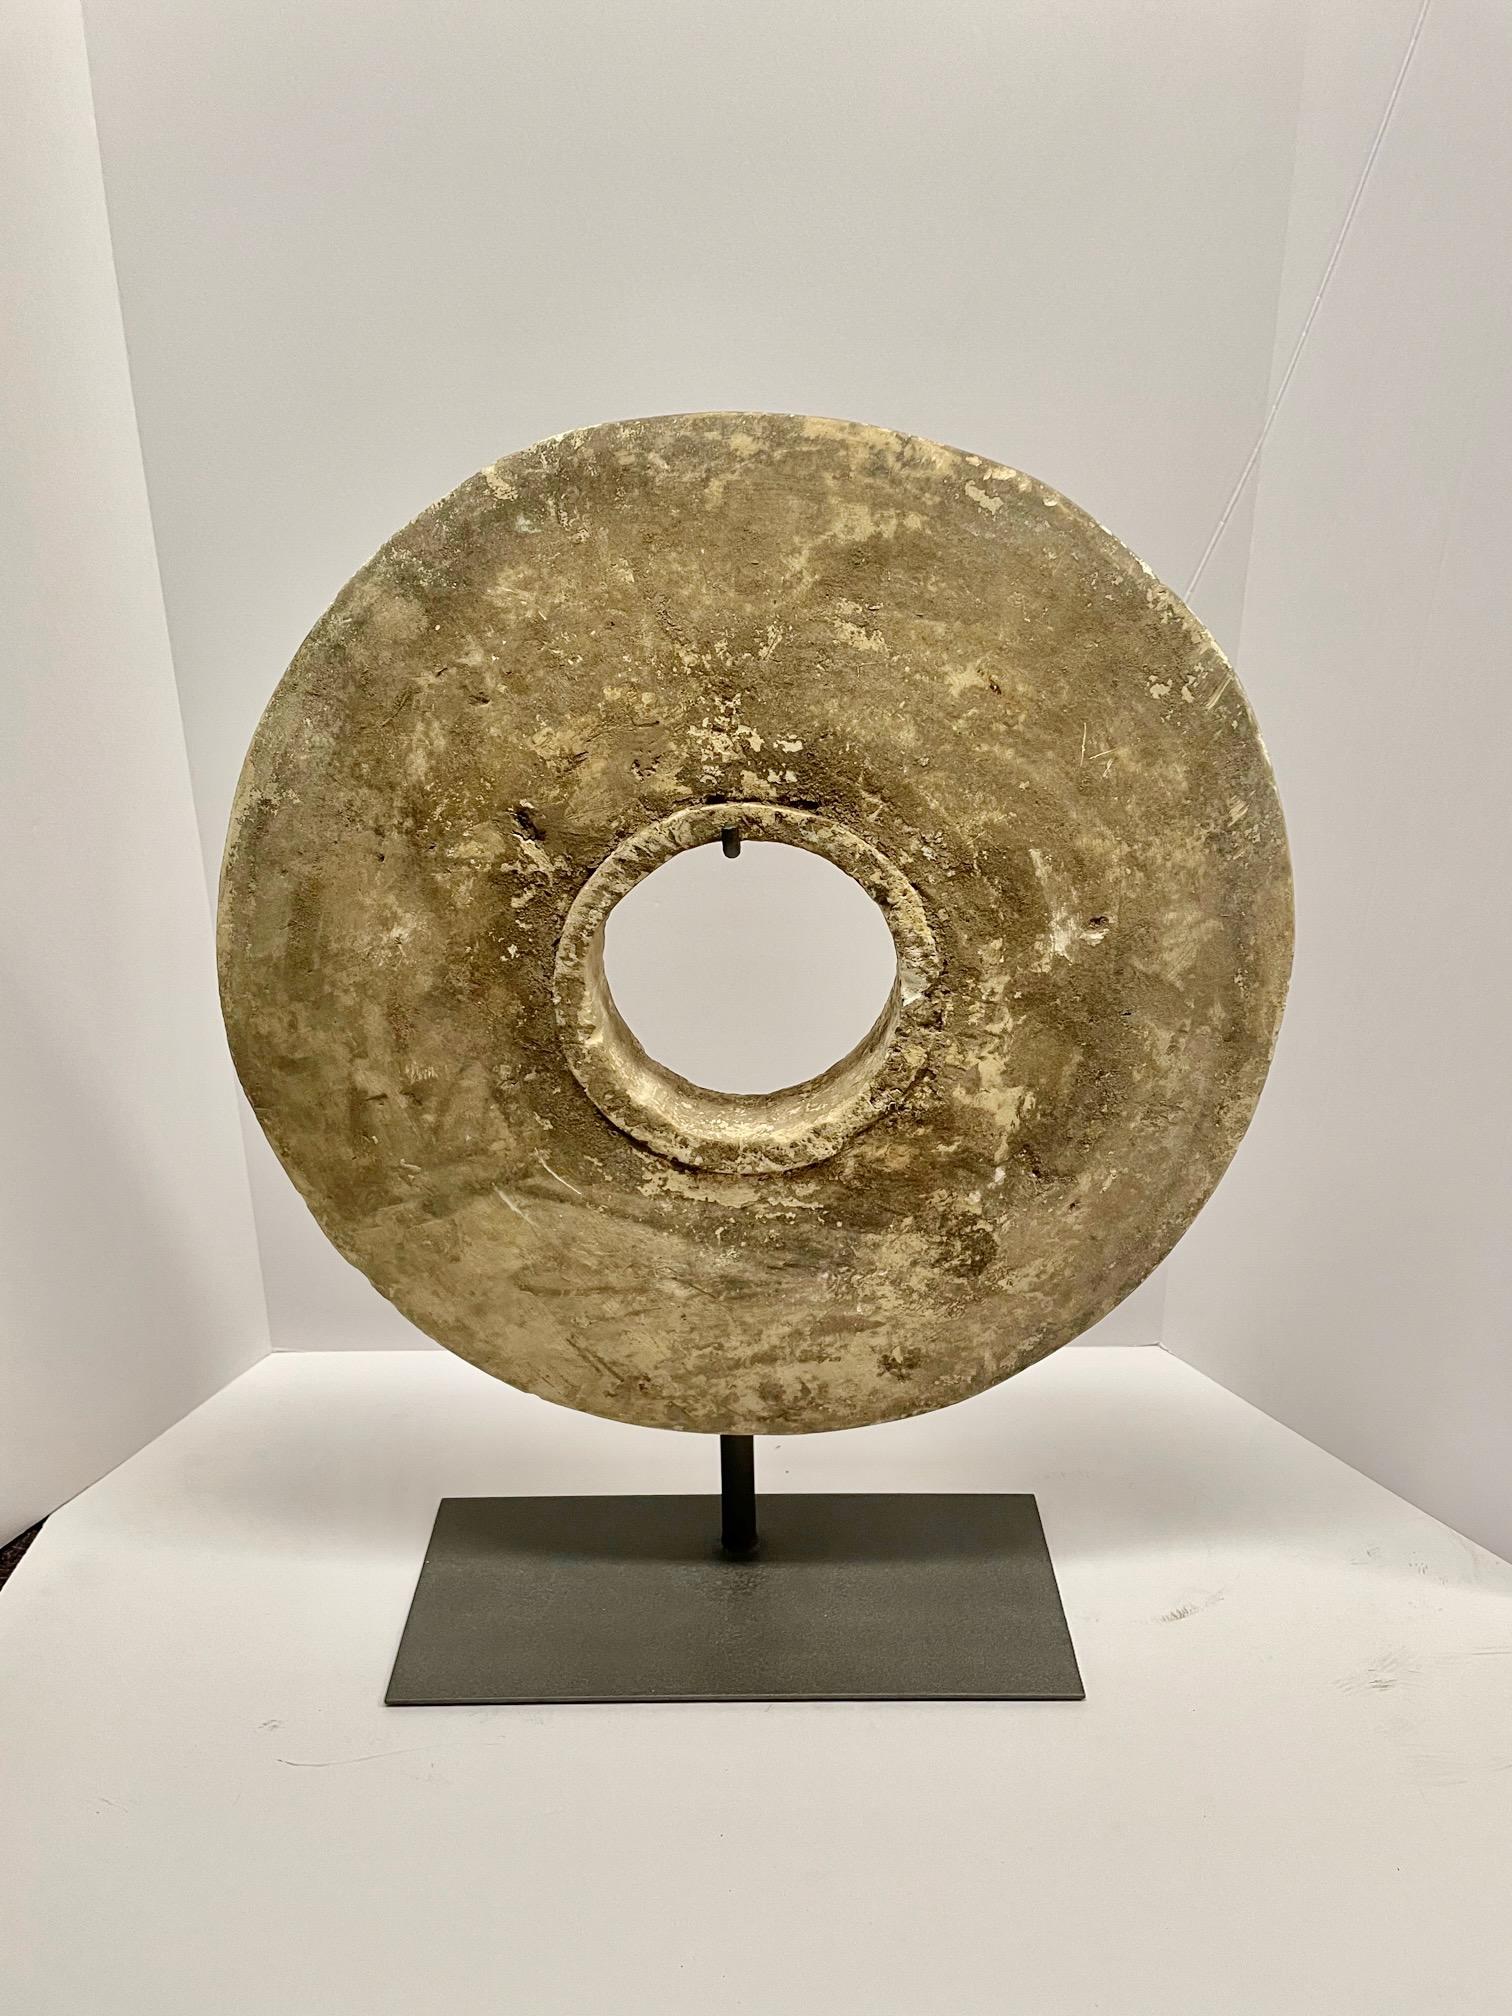 1920's Indonesian round stone architectural disc on stand.
Natural weathered patina.
Stand measures 4